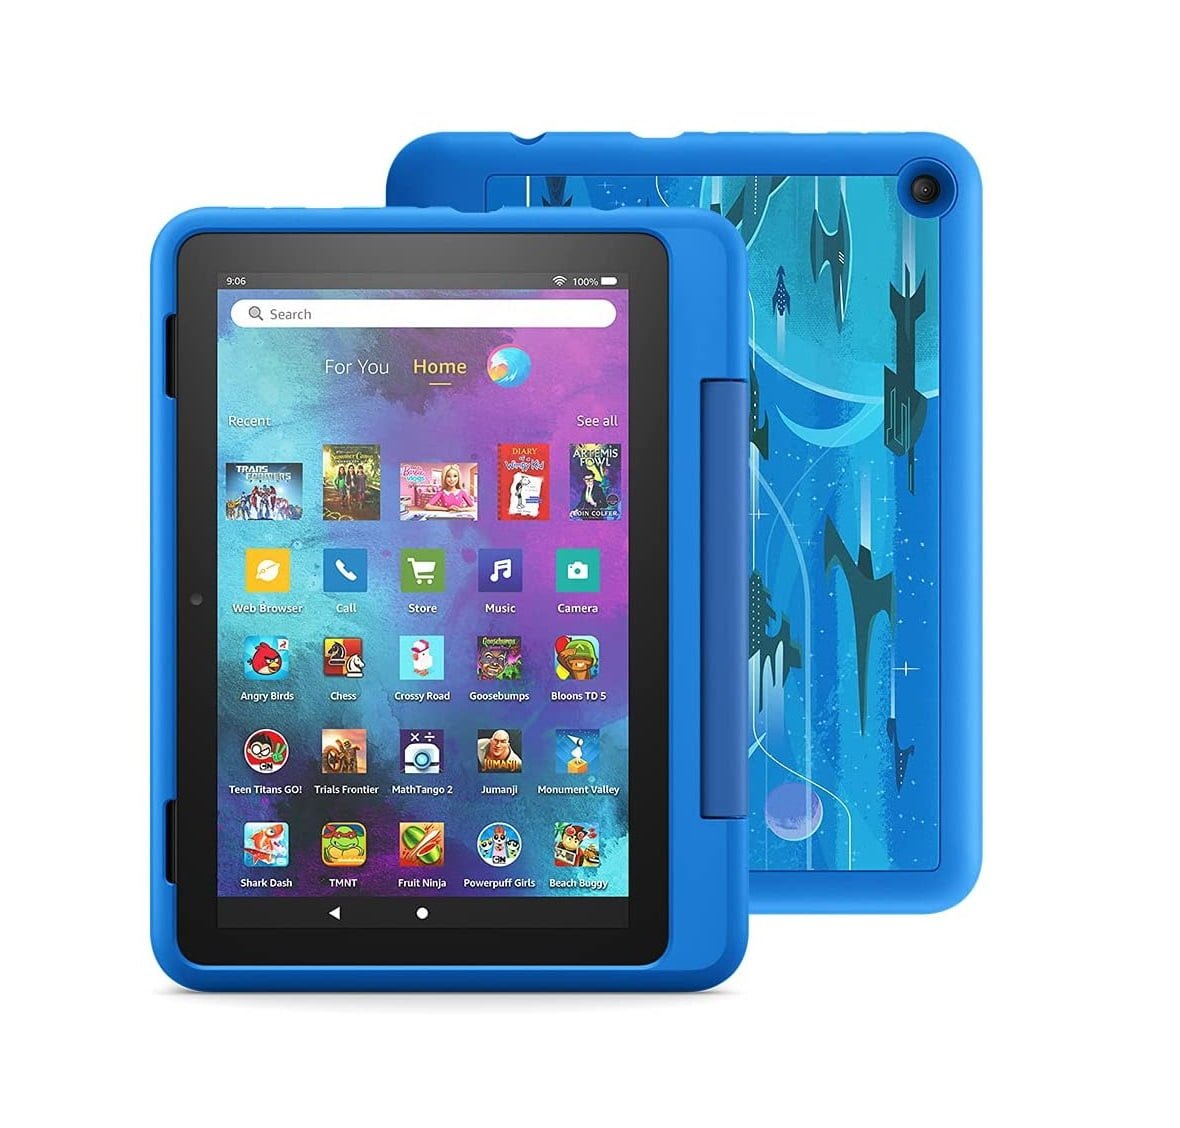 619Vulrfsis. Ac Sl1000 Amazon &Amp;Lt;H1&Amp;Gt;Amazon Fire Hd 8 Kids Pro Tablet 10Th Gen, 8&Amp;Quot; Hd, Ages 6–12, 32 Gb, &Amp;Lt;Span Id=&Amp;Quot;Producttitle&Amp;Quot; Class=&Amp;Quot;A-Size-Large Product-Title-Word-Break&Amp;Quot;&Amp;Gt;Intergalactic&Amp;Lt;/Span&Amp;Gt;&Amp;Lt;/H1&Amp;Gt; &Amp;Lt;Ul&Amp;Gt; &Amp;Lt;Li&Amp;Gt;&Amp;Lt;Span Class=&Amp;Quot;A-List-Item&Amp;Quot;&Amp;Gt;He Web Browser Comes With Built-In Controls Designed To Help Filter Out Inappropriate Sites And Let Parents Add Or Block Specific Websites At Any Time. &Amp;Lt;/Span&Amp;Gt;&Amp;Lt;/Li&Amp;Gt; &Amp;Lt;Li&Amp;Gt;&Amp;Lt;Span Class=&Amp;Quot;A-List-Item&Amp;Quot;&Amp;Gt; Stay In Touch – Kids Can Send Announcements And Make Voice And Video Calls Over Wifi To Approved Contacts With An Alexa-Enabled Device Or The Alexa App. &Amp;Lt;/Span&Amp;Gt;&Amp;Lt;/Li&Amp;Gt; &Amp;Lt;Li&Amp;Gt;&Amp;Lt;Span Class=&Amp;Quot;A-List-Item&Amp;Quot;&Amp;Gt; Features A Quad-Core Processor, 2 Gb Ram, 8&Amp;Quot; Hd Display, Dual Cameras, Usb-C (2.0) Port, And Up To 1 Tb Of Expandable Storage.&Amp;Lt;/Span&Amp;Gt;&Amp;Lt;/Li&Amp;Gt; &Amp;Lt;/Ul&Amp;Gt; &Amp;Nbsp; Amazon Fire Hd 8 Kids Pro Amazon Fire Hd 8 Kids Pro Tablet 10Th Gen, 8&Amp;Quot; Hd, Ages 6–12, 32 Gb, Intergalactic